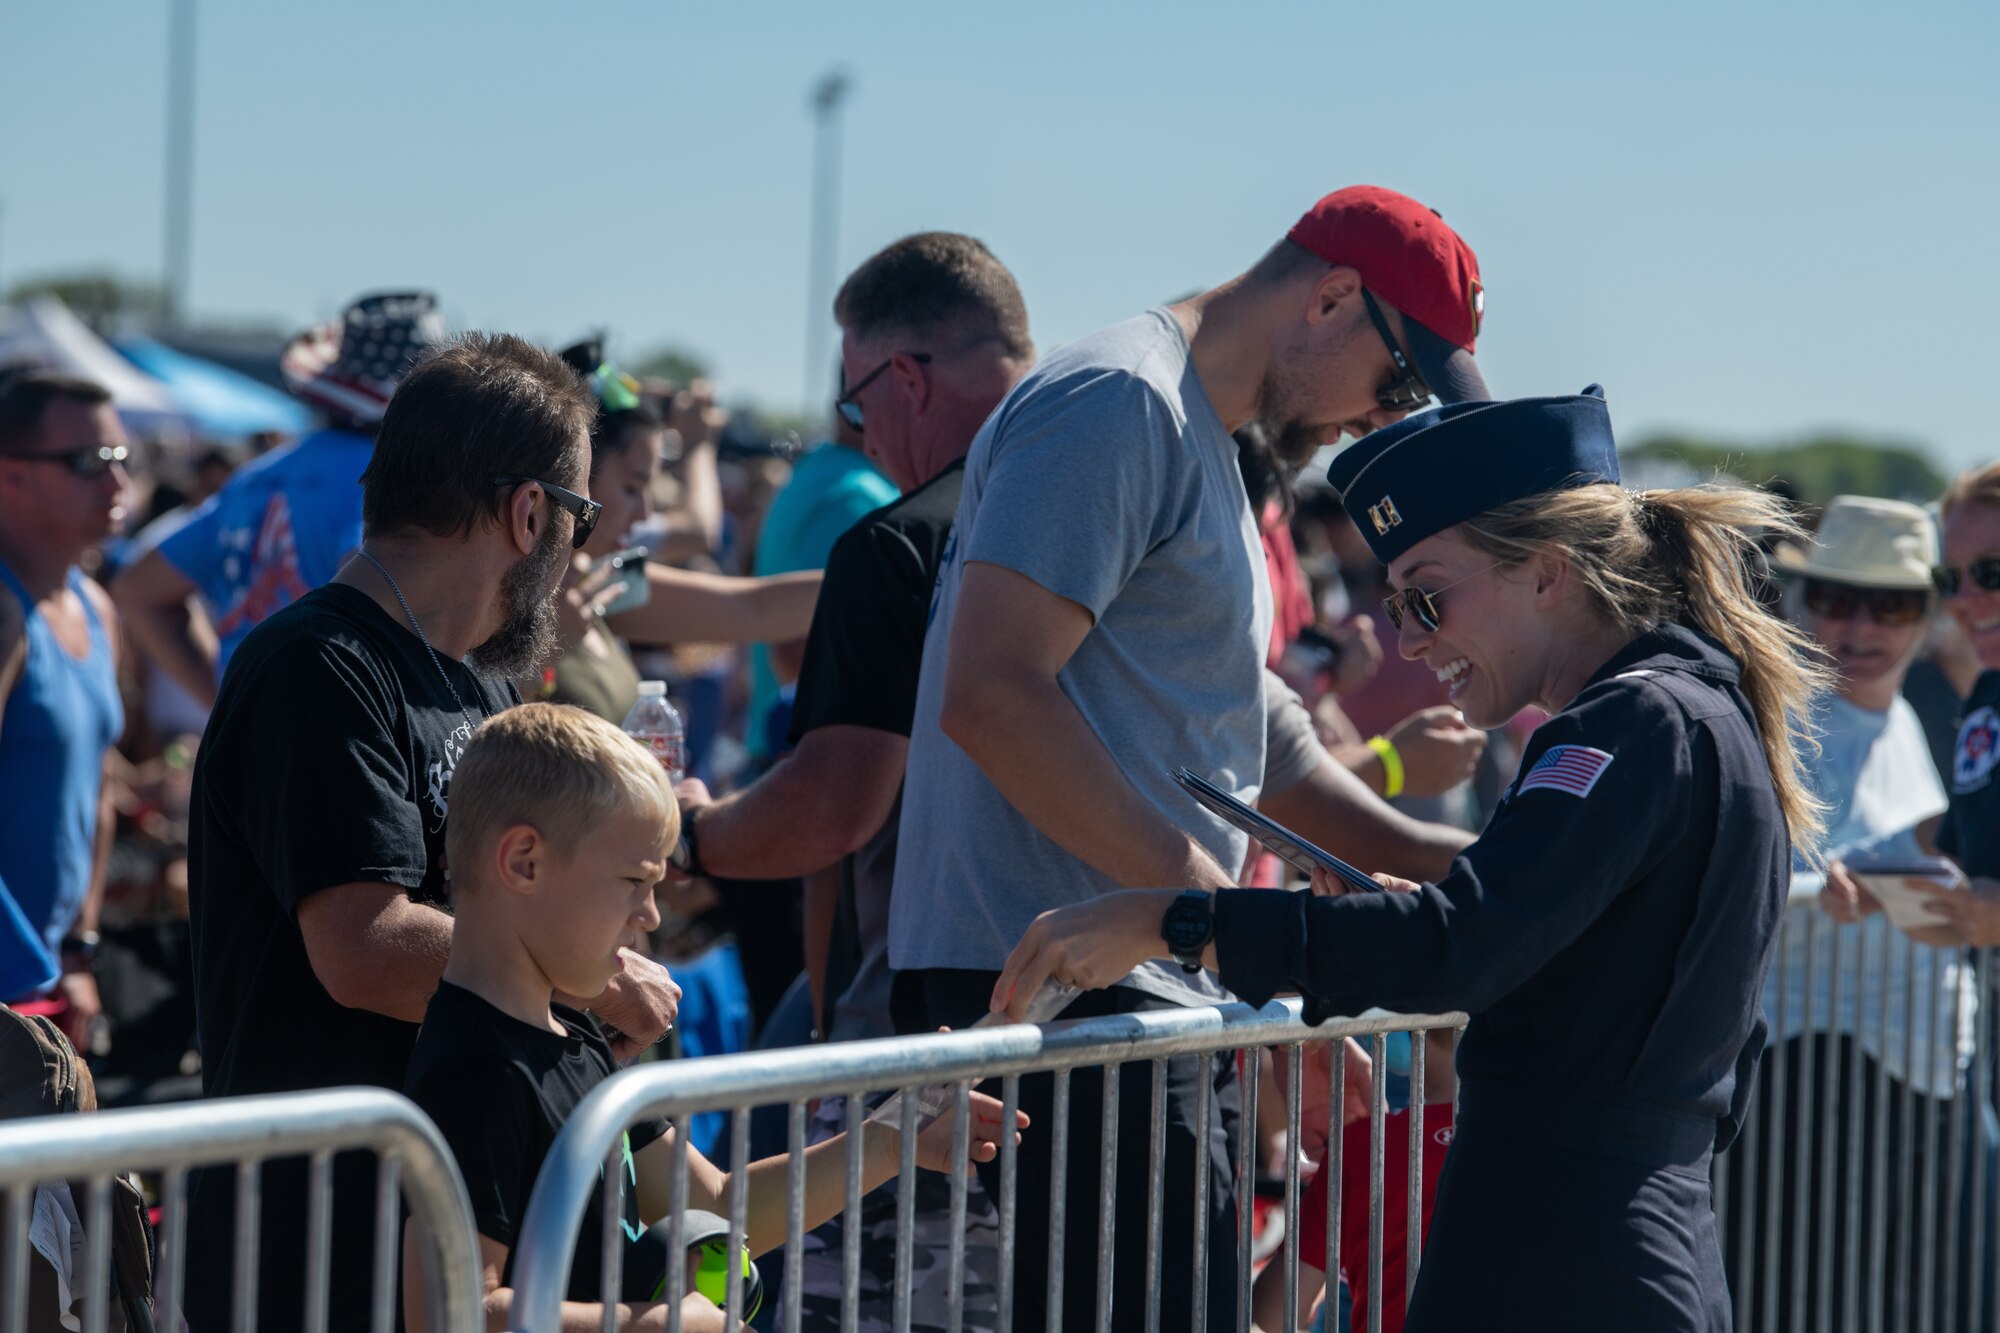 Capt. Kaitlin Toner, U.S Air Force Thunderbird Public Affairs Officer, hands out brochures to spectators at Frontiers in Flight Open House & Air Show, Sept. 25, 2022, McConnell Air Force Base, Kan.